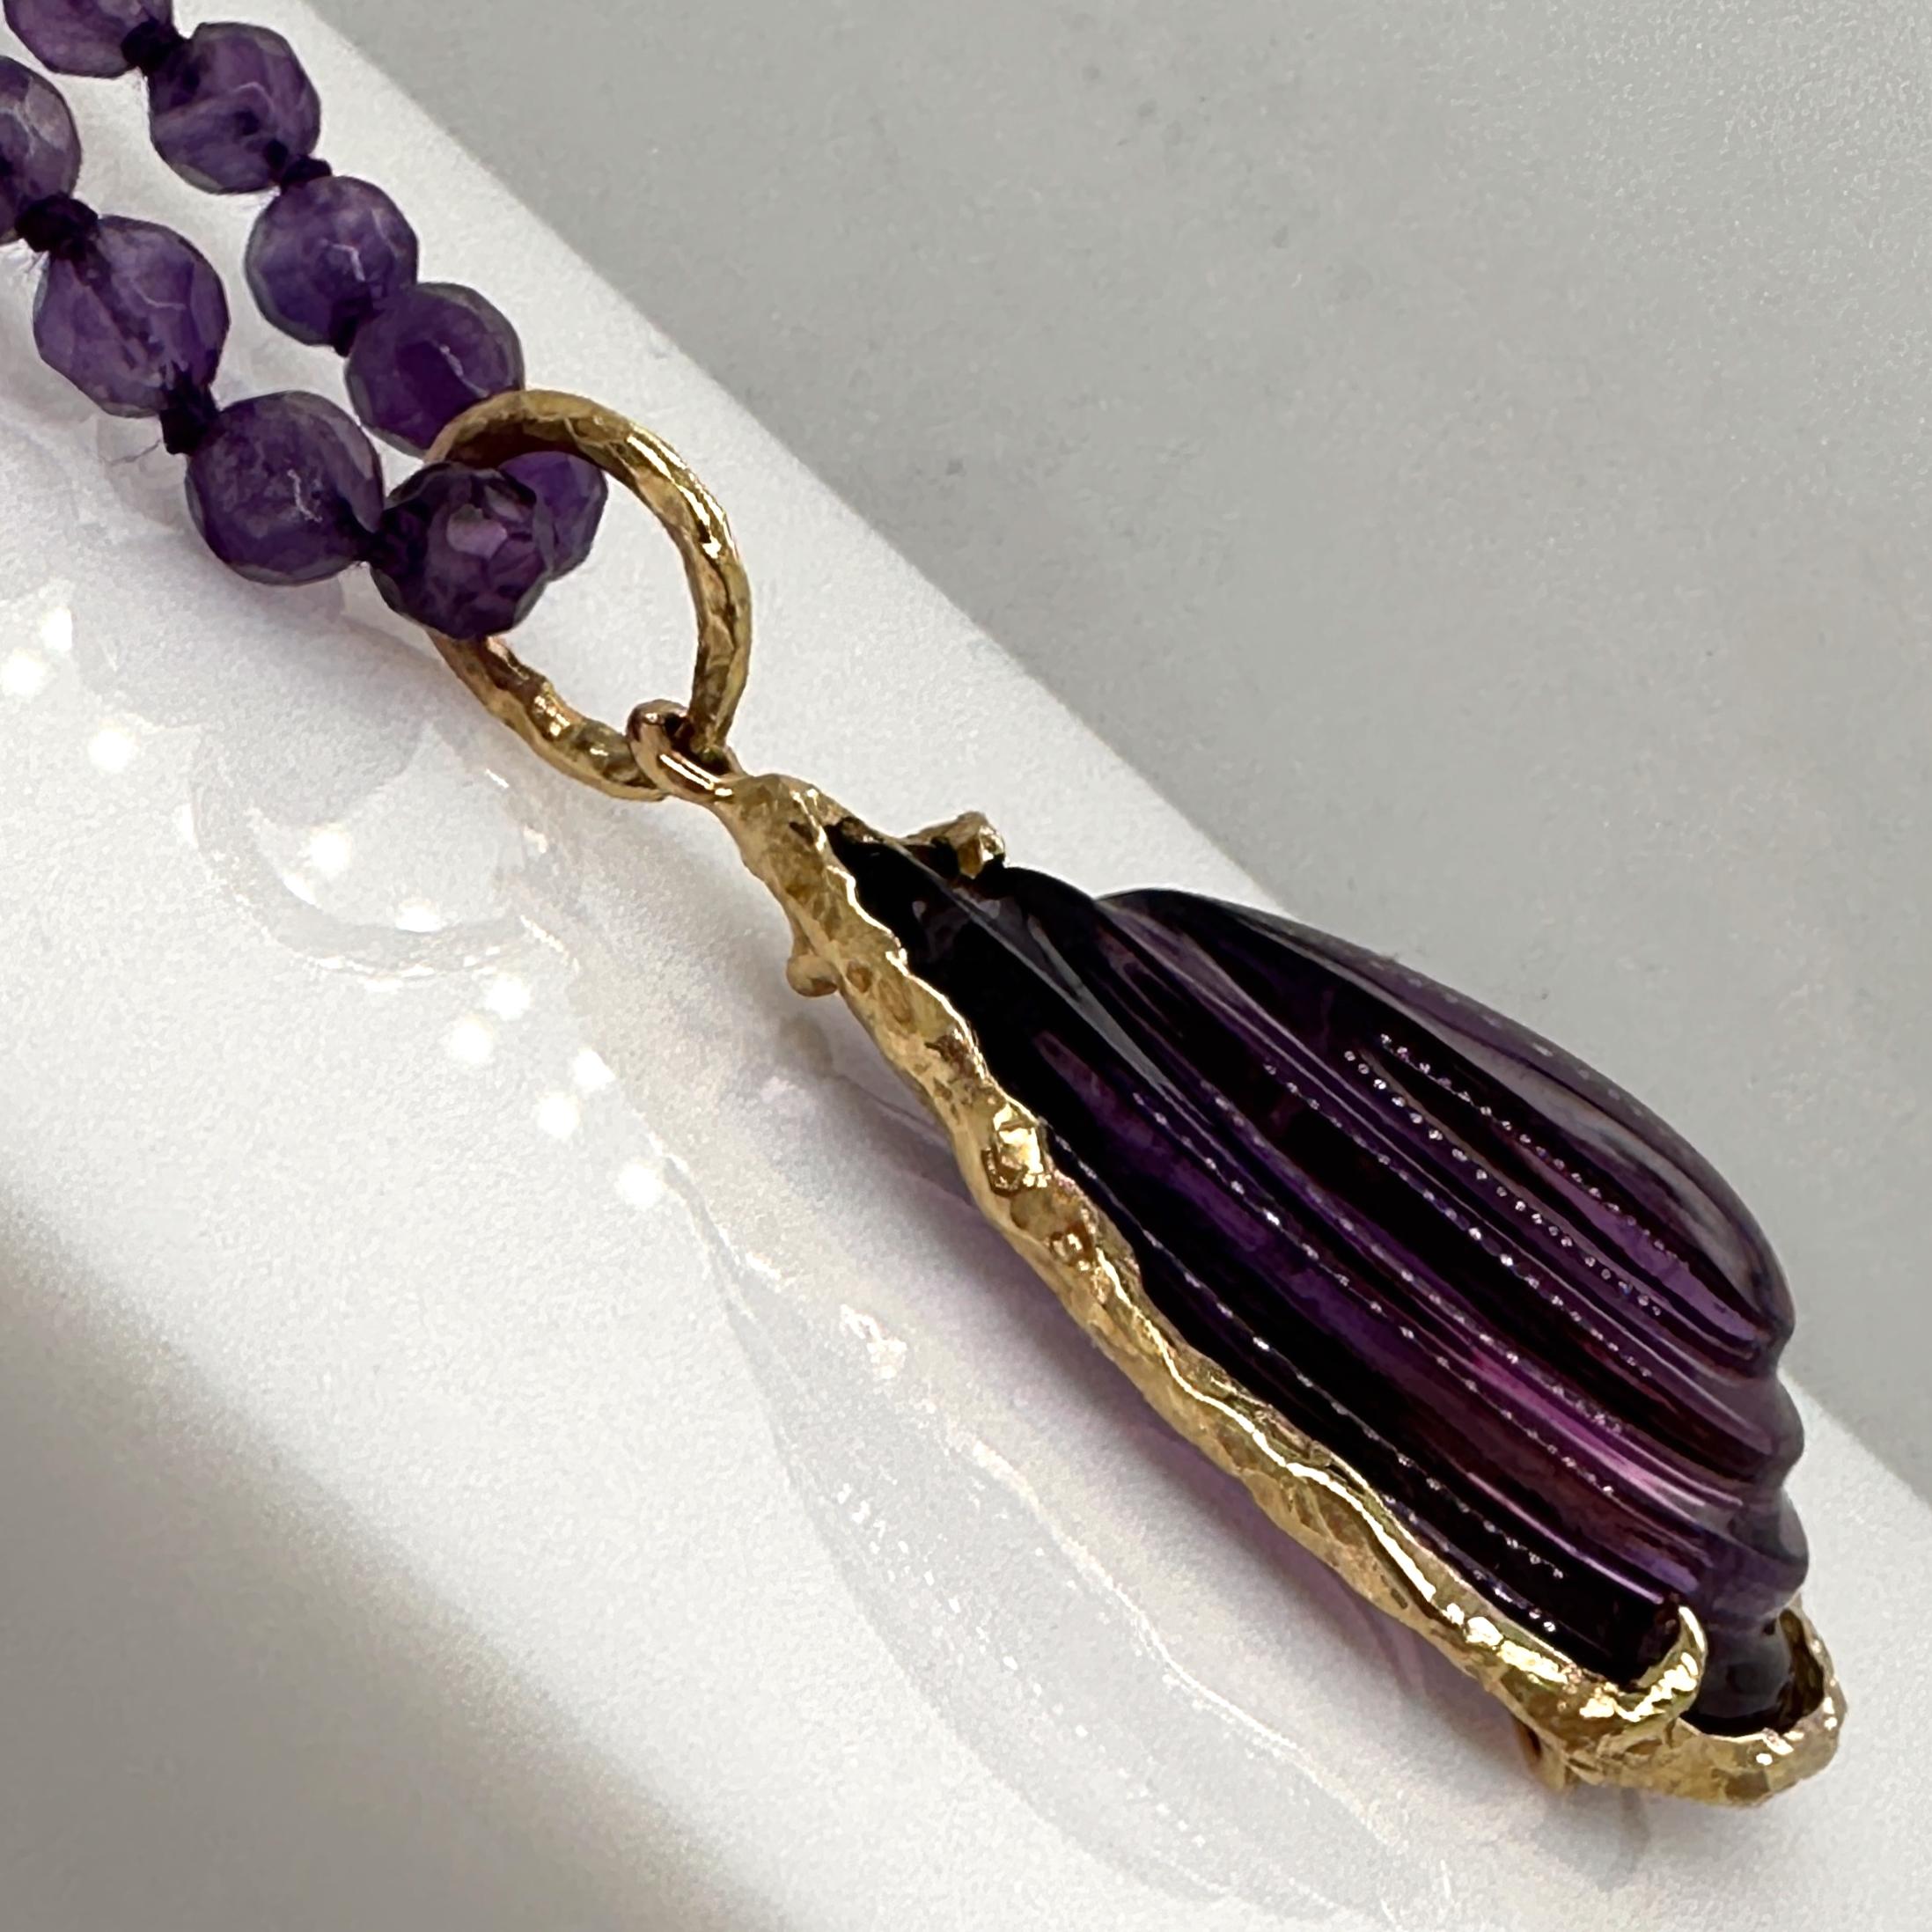 39 Carat Carved Amethyst Pendant in 18K Gold on Convertible Amethyst Bead Chain For Sale 2